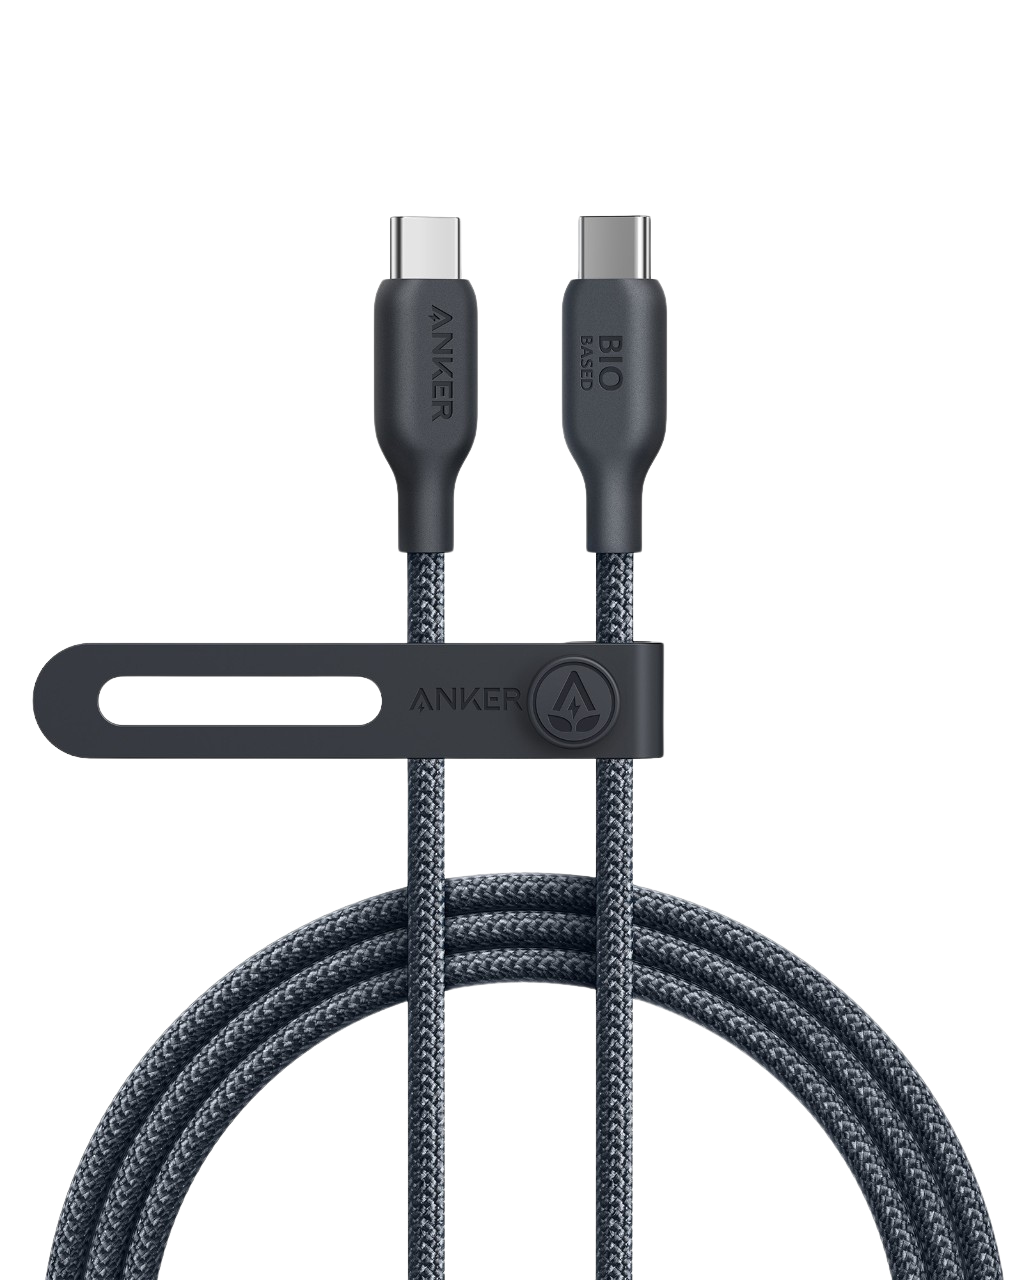 Anker USB-C to USB-C Cable (3 ft / 6 ft)